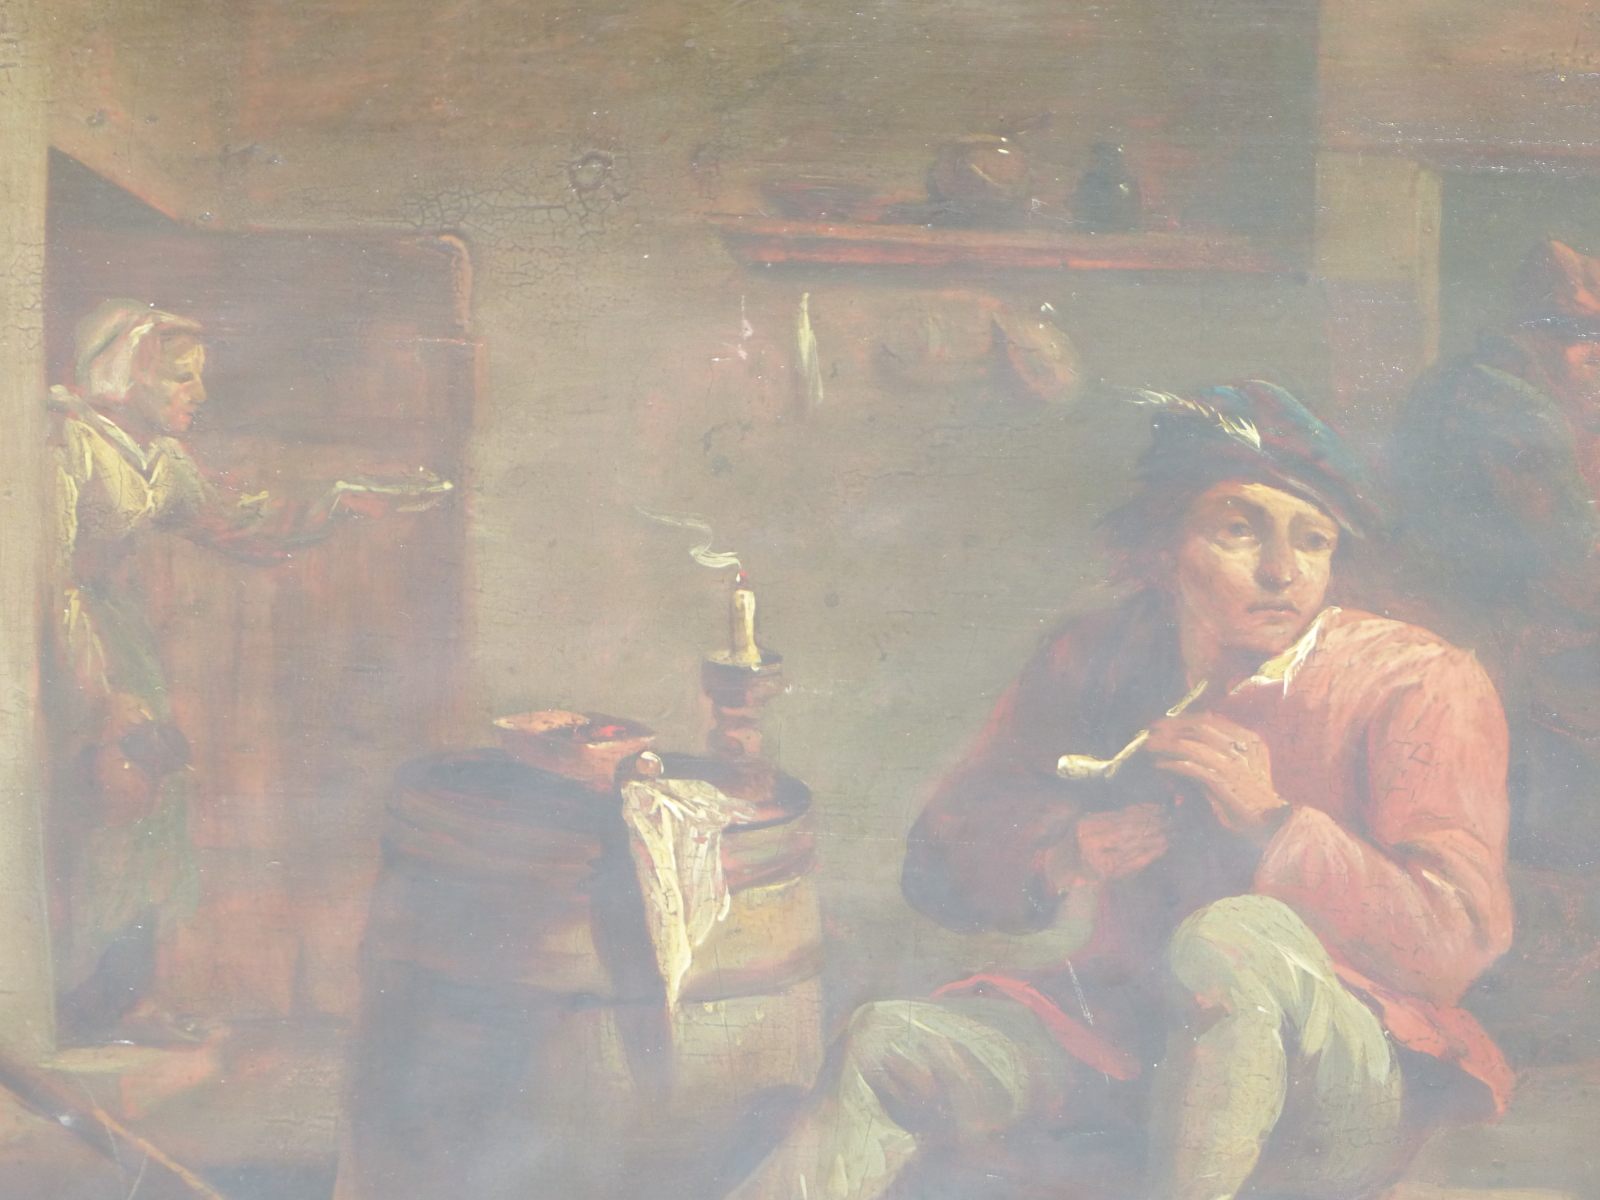 MANNER OF DAVID TENIERS THE YOUNGER, A PIPE SMOKER IN A TAVERN INTERIOR, OIL ON OAK PANEL, 24 x 18. - Image 3 of 8